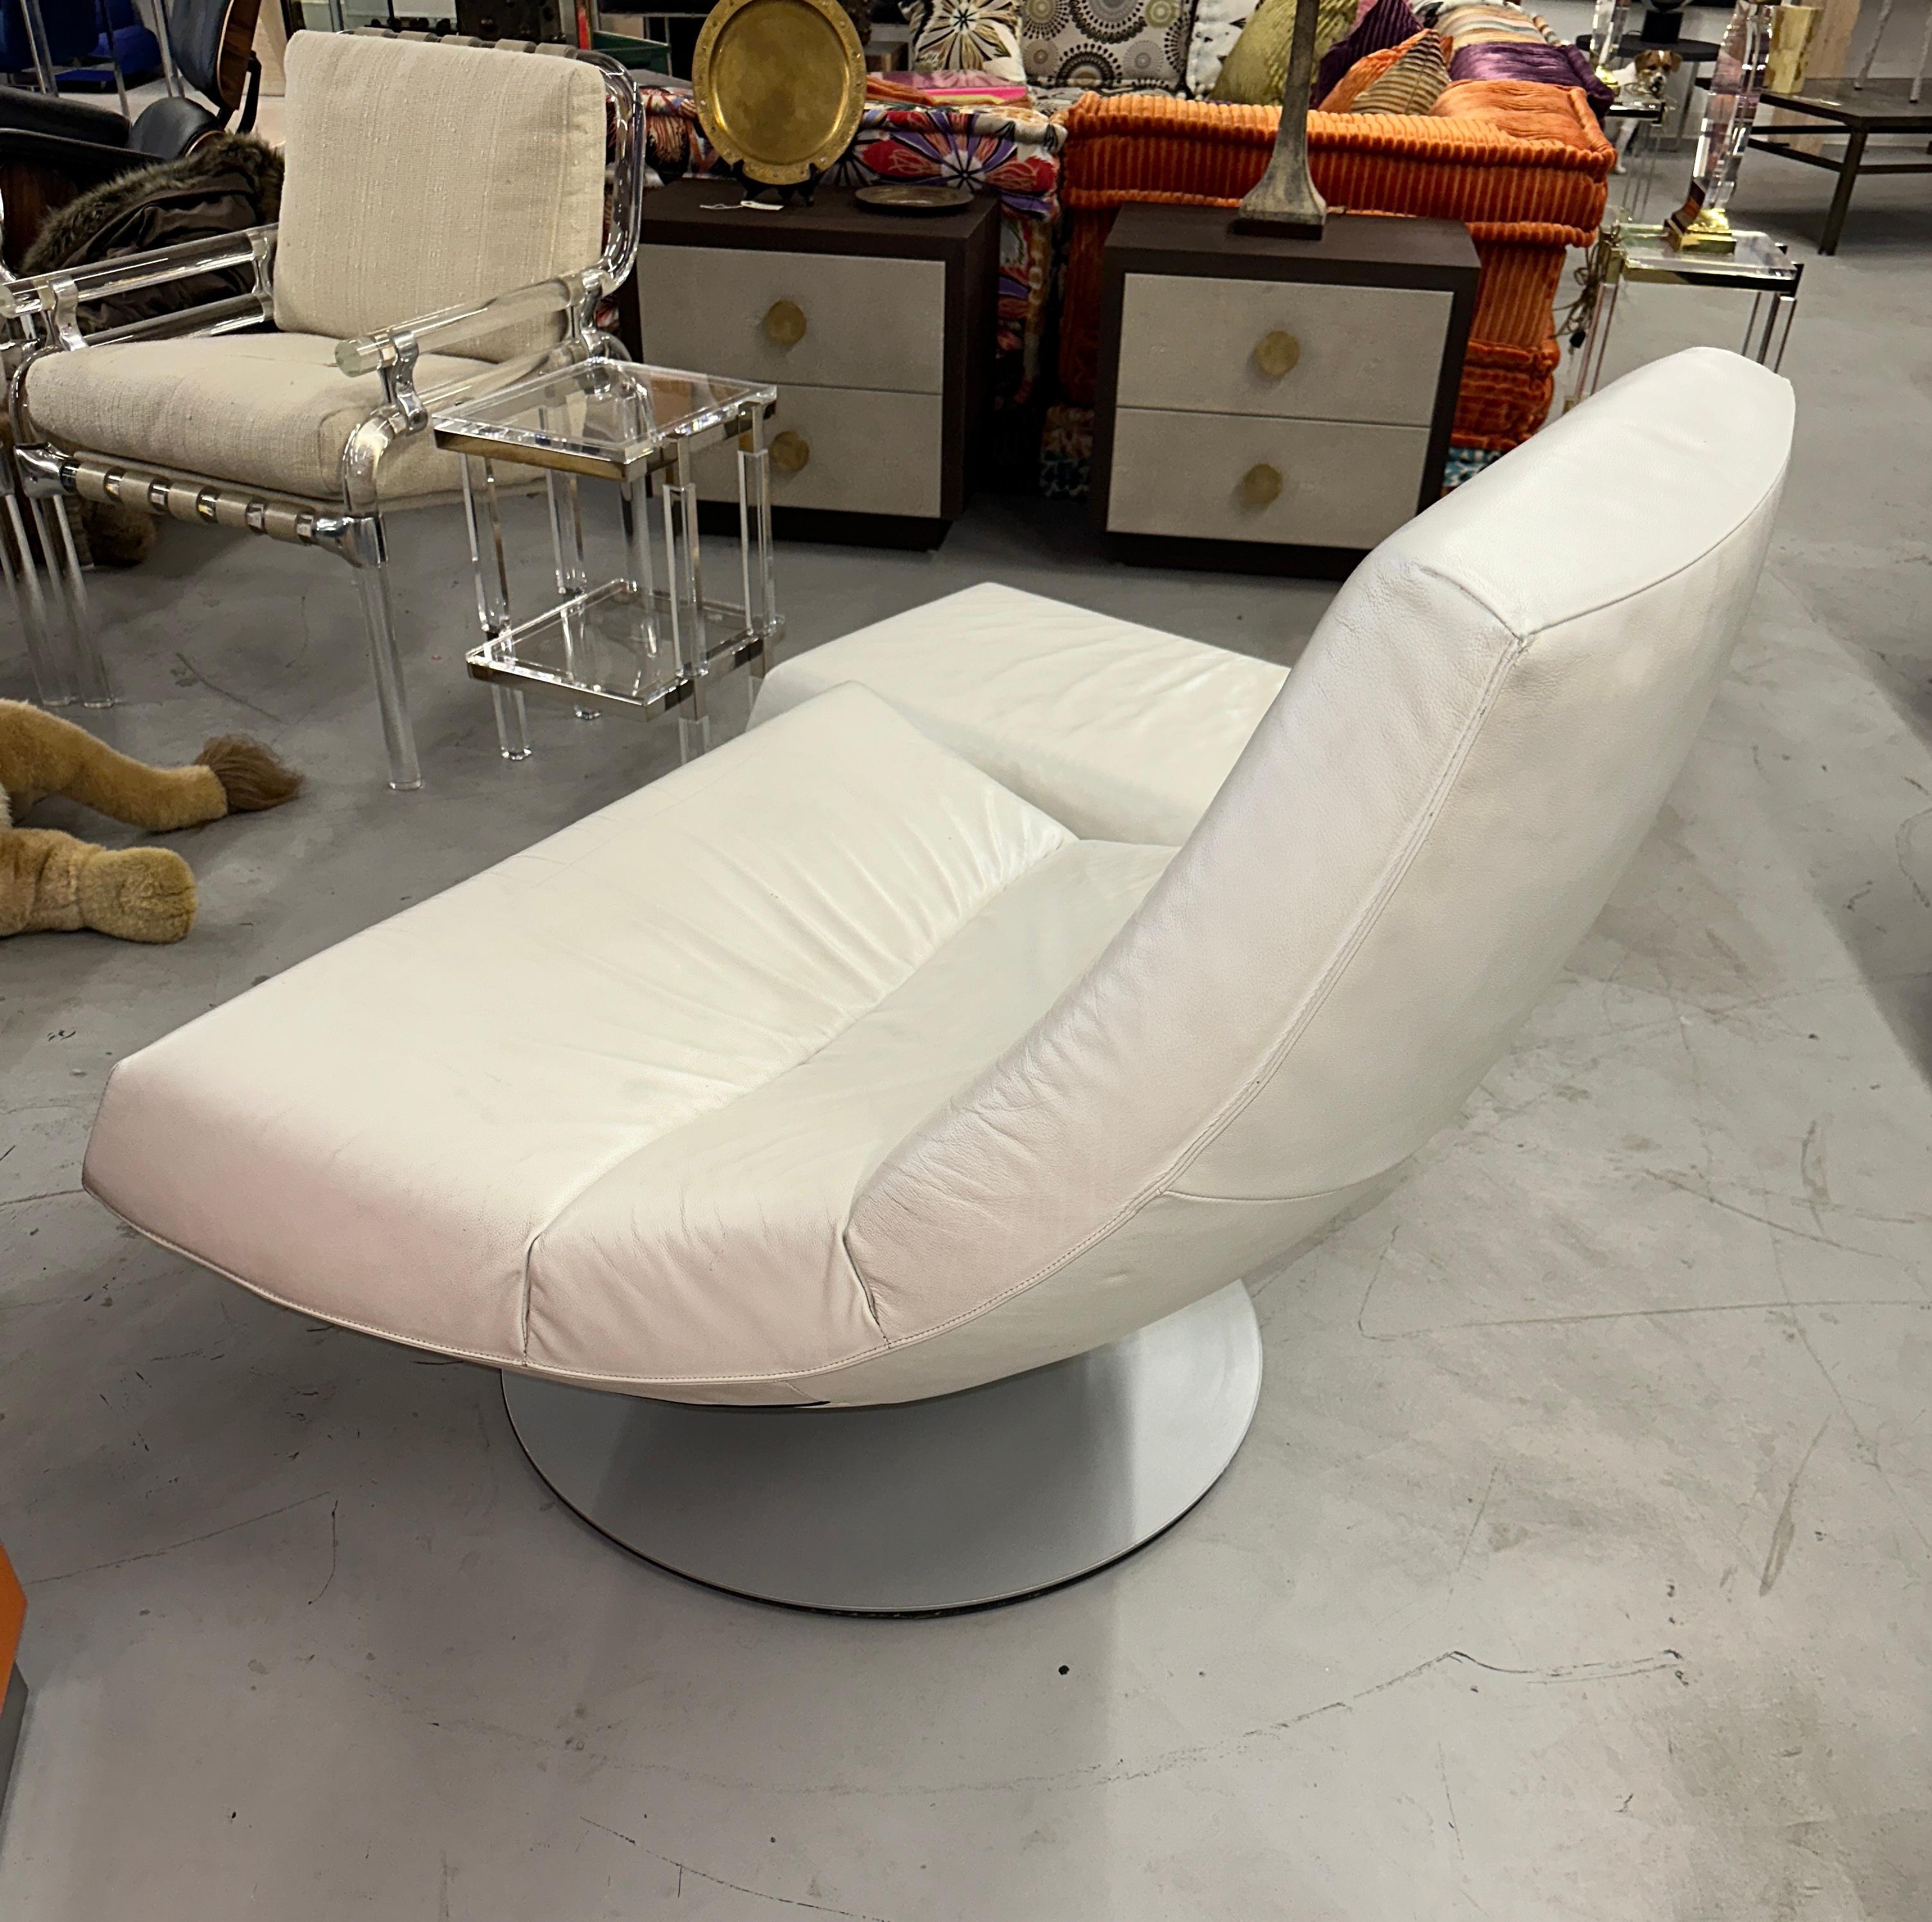 Olivier swivel easy chair and ottoman in white leather. The set is designed by Gijs Papovoine and was made by Dutch manufacturer Montis. Very comfortable and functional, both pieces rotate a full 360 degrees. Pictured next to a Herman Miller Eames